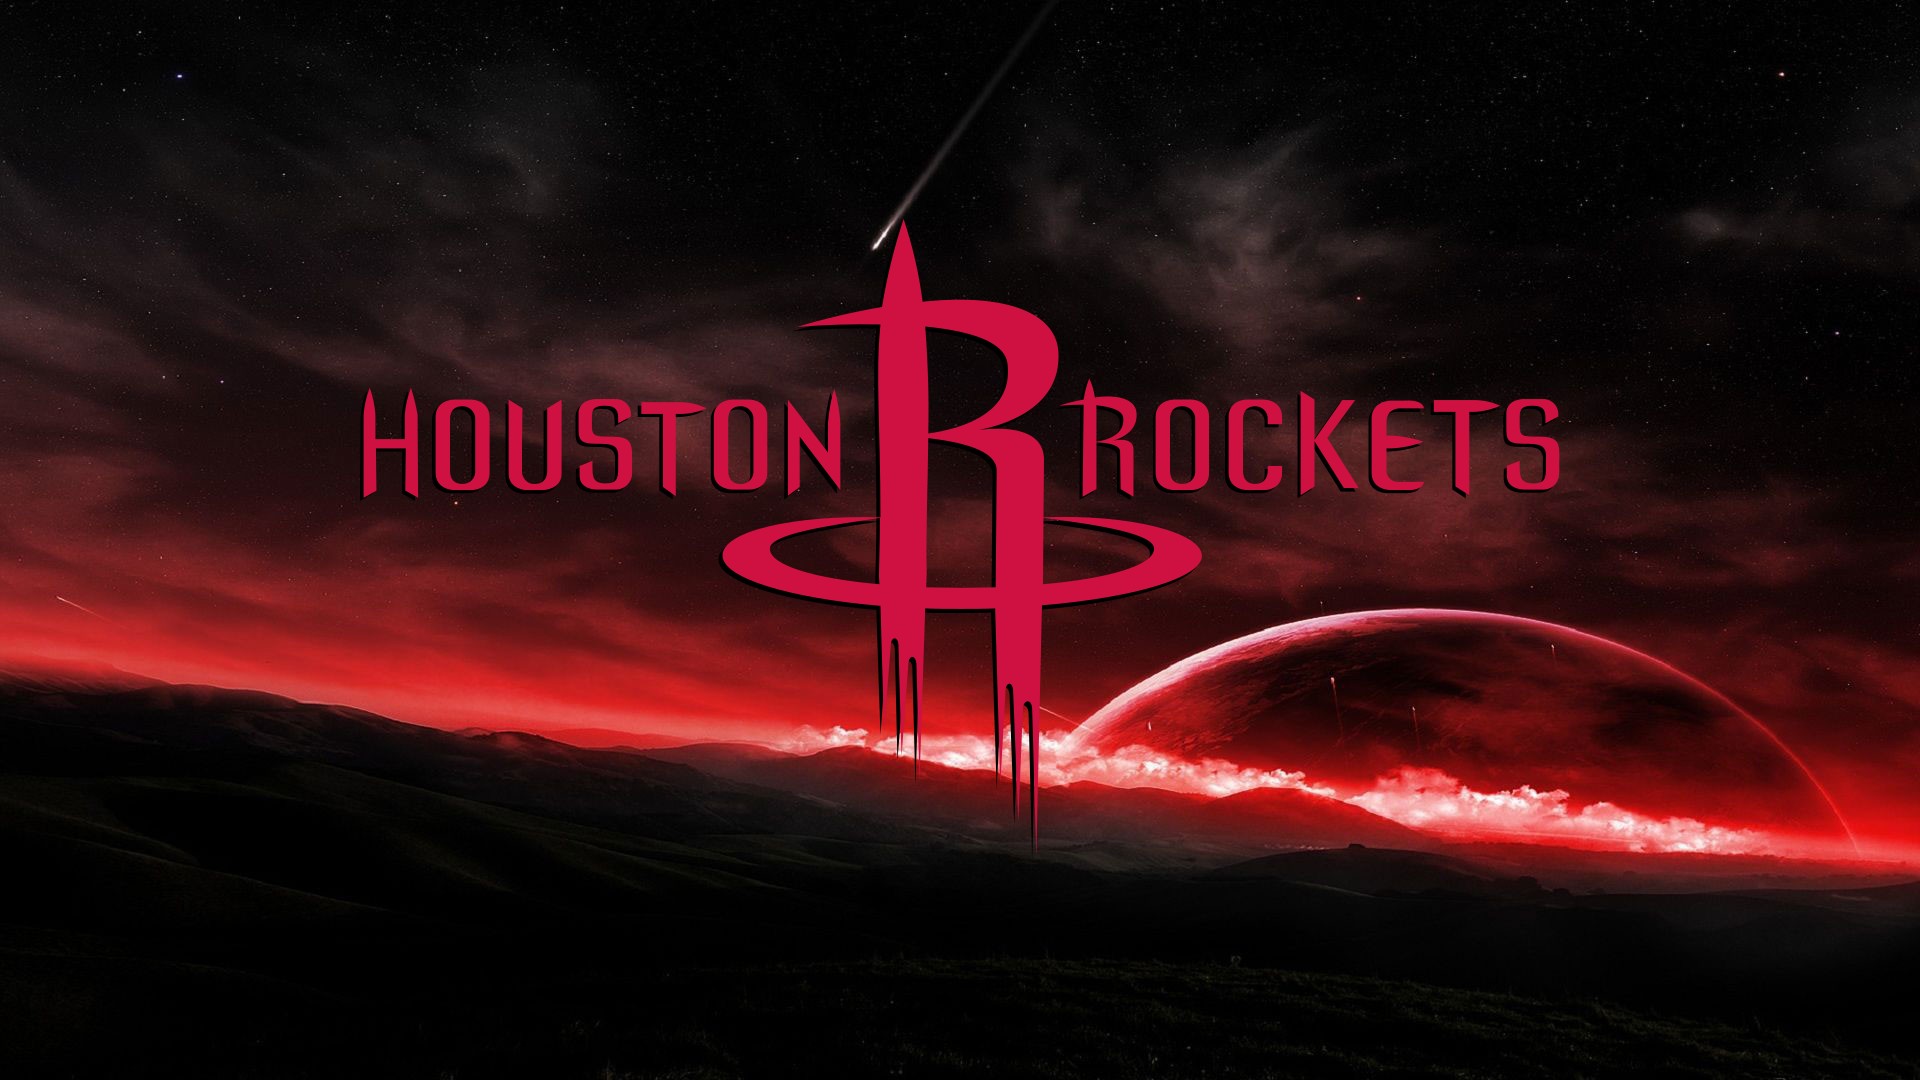 Houston Rockets Wallpaper For Mac Backgrounds with image dimensions 1920x1080 pixel. You can make this wallpaper for your Desktop Computer Backgrounds, Windows or Mac Screensavers, iPhone Lock screen, Tablet or Android and another Mobile Phone device